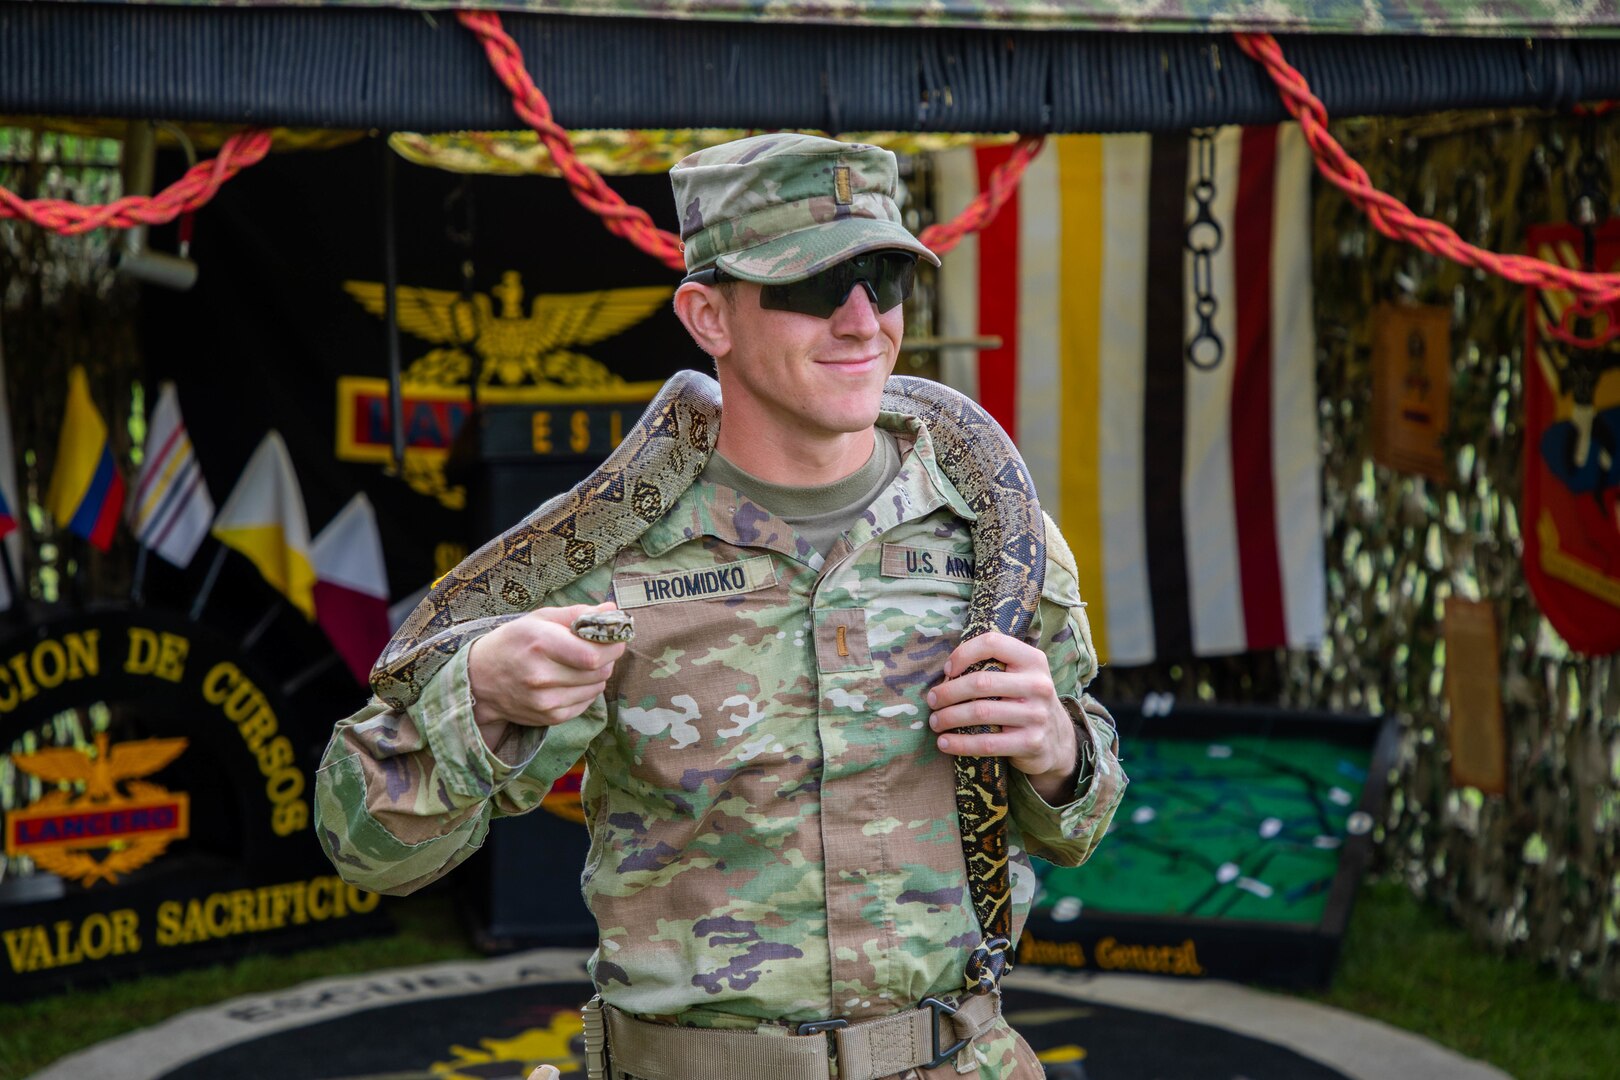 2nd Lt. Nolan Hromidko, of LaCrosse, Wisconsin, assigned to 2nd Battalion, 130th Infantry Regiment, 33rd Infantry Brigade Combat Team, Illinois Army National Guard, holds a snake which represents the Colombian Army's predominance in jungle operations prior to the opening ceremony of Exercise Southern Vanguard 23 on Nov. 8, 2022 at Tolemaida Military Base, Colombia.